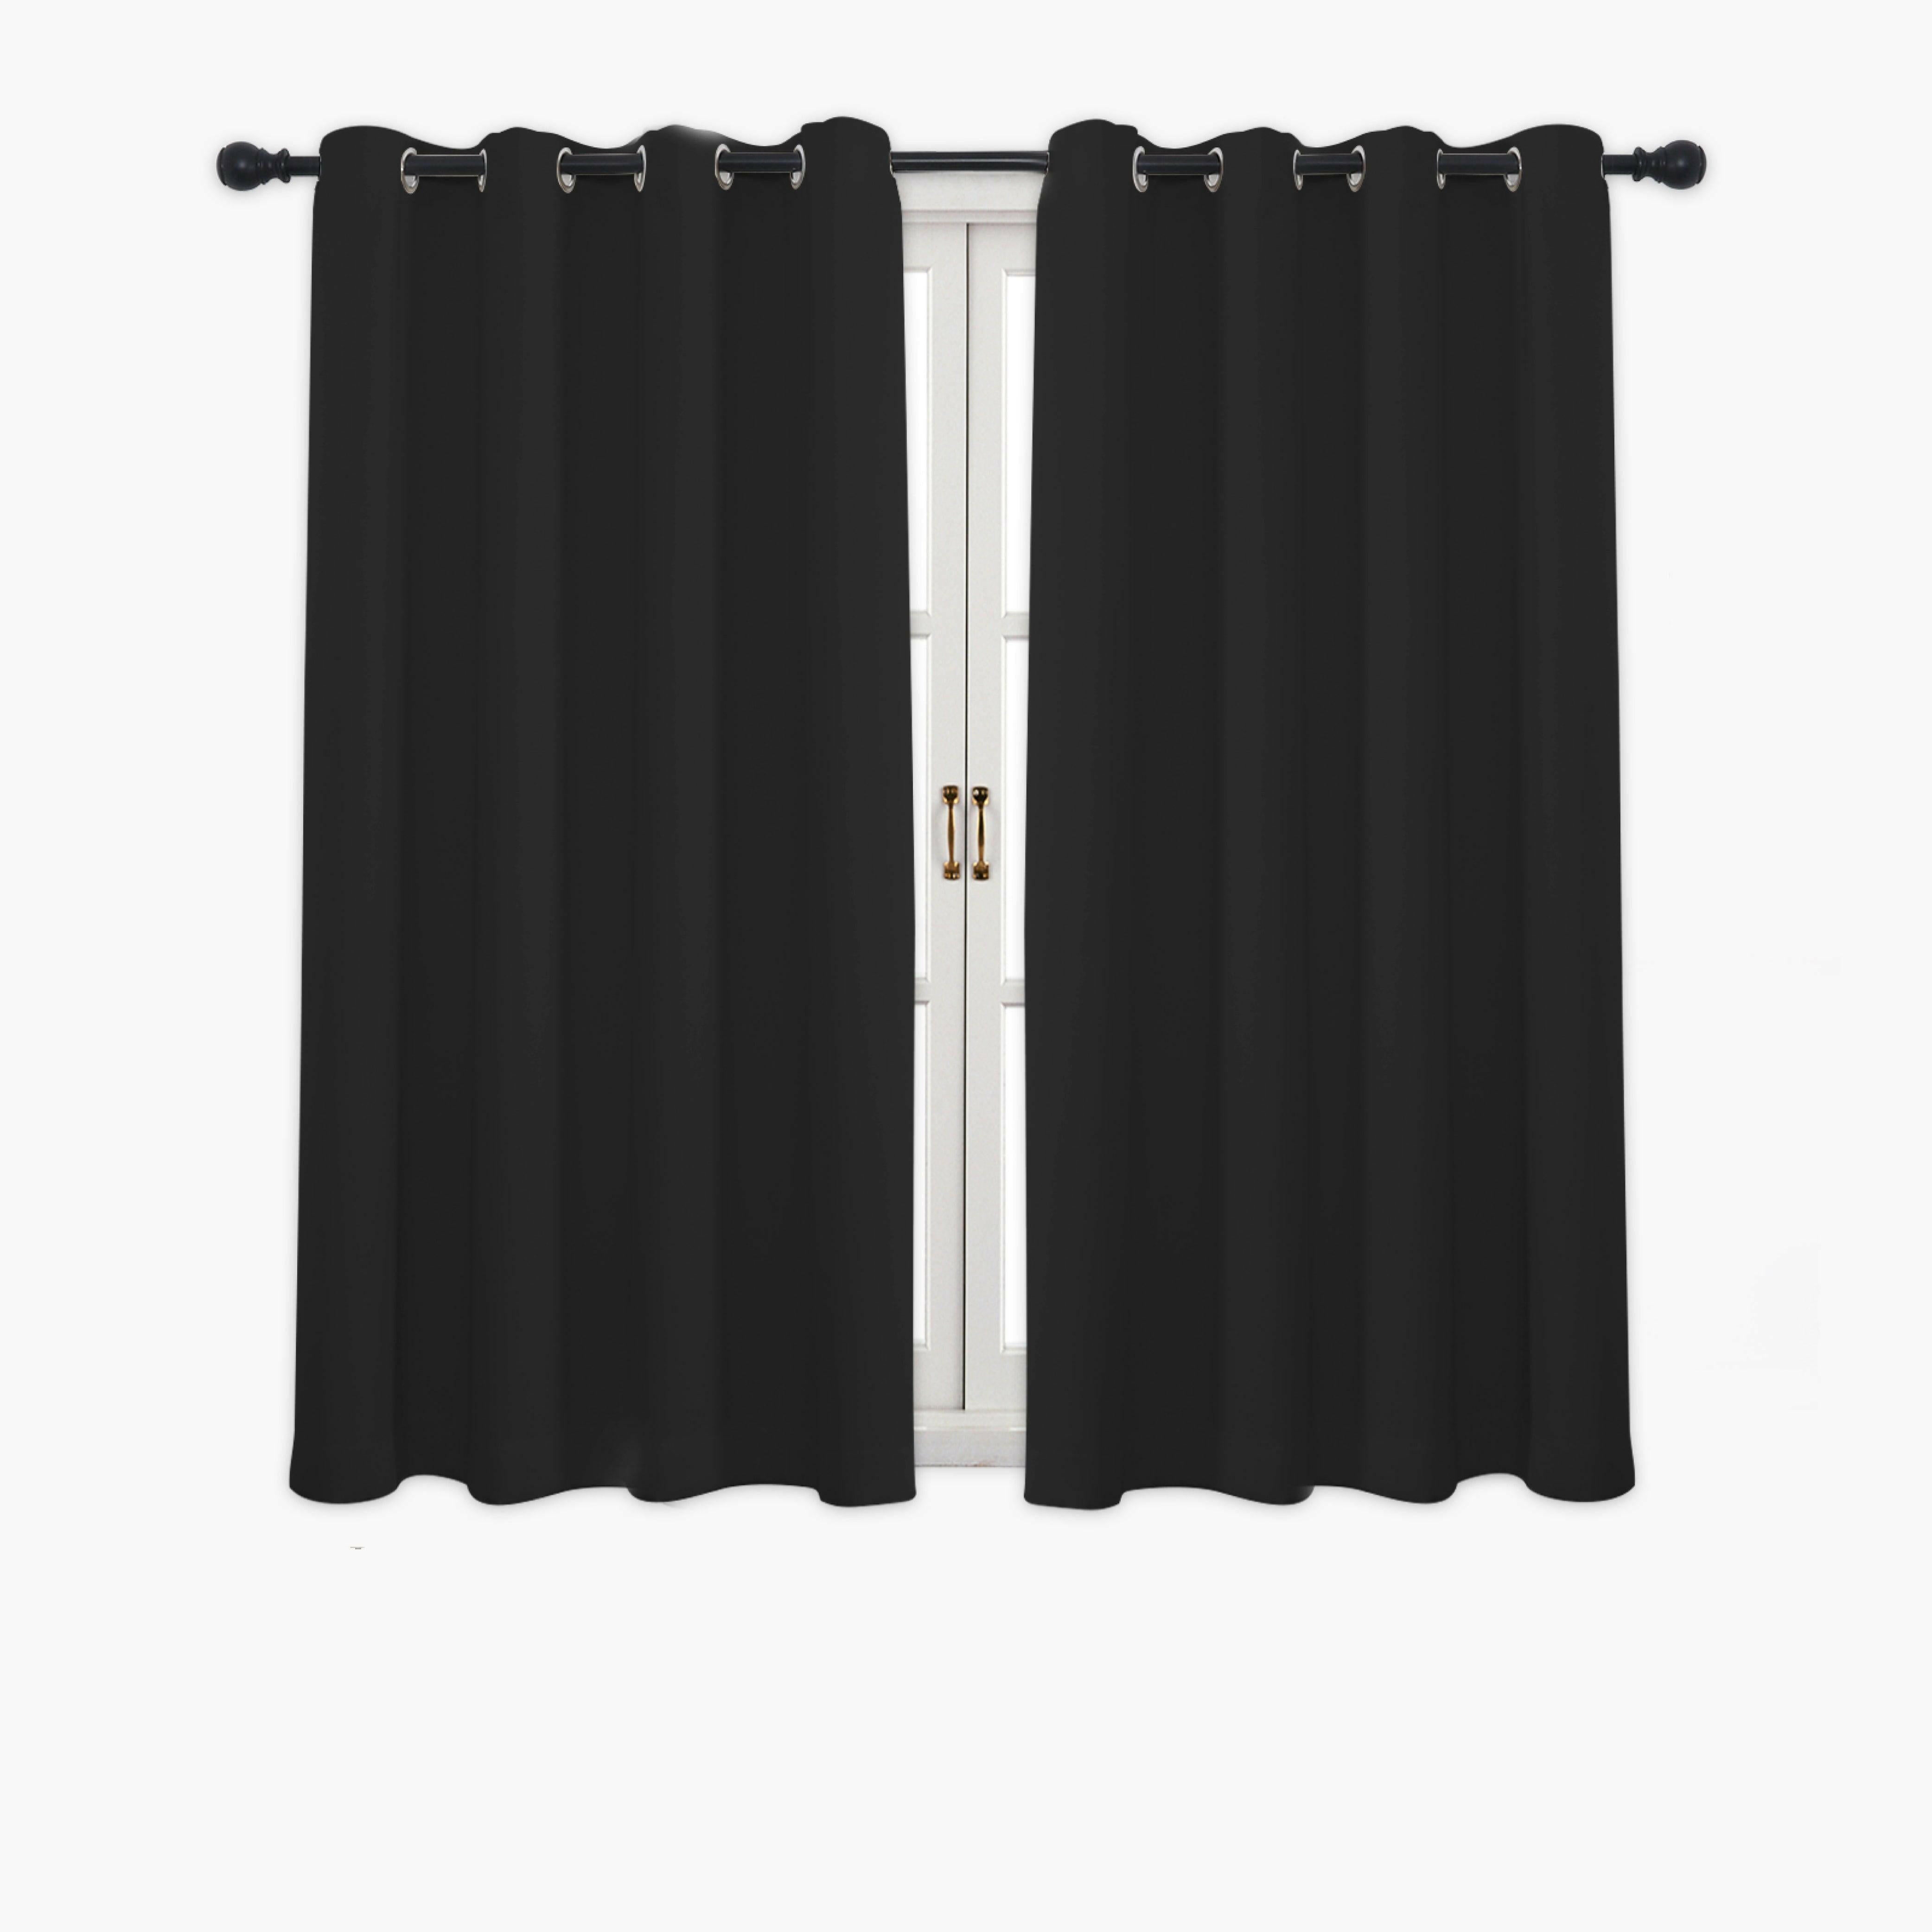 Hyper Cover 3-Layers Blockout Curtains Black | Window Curtains | Brilliant Home Living